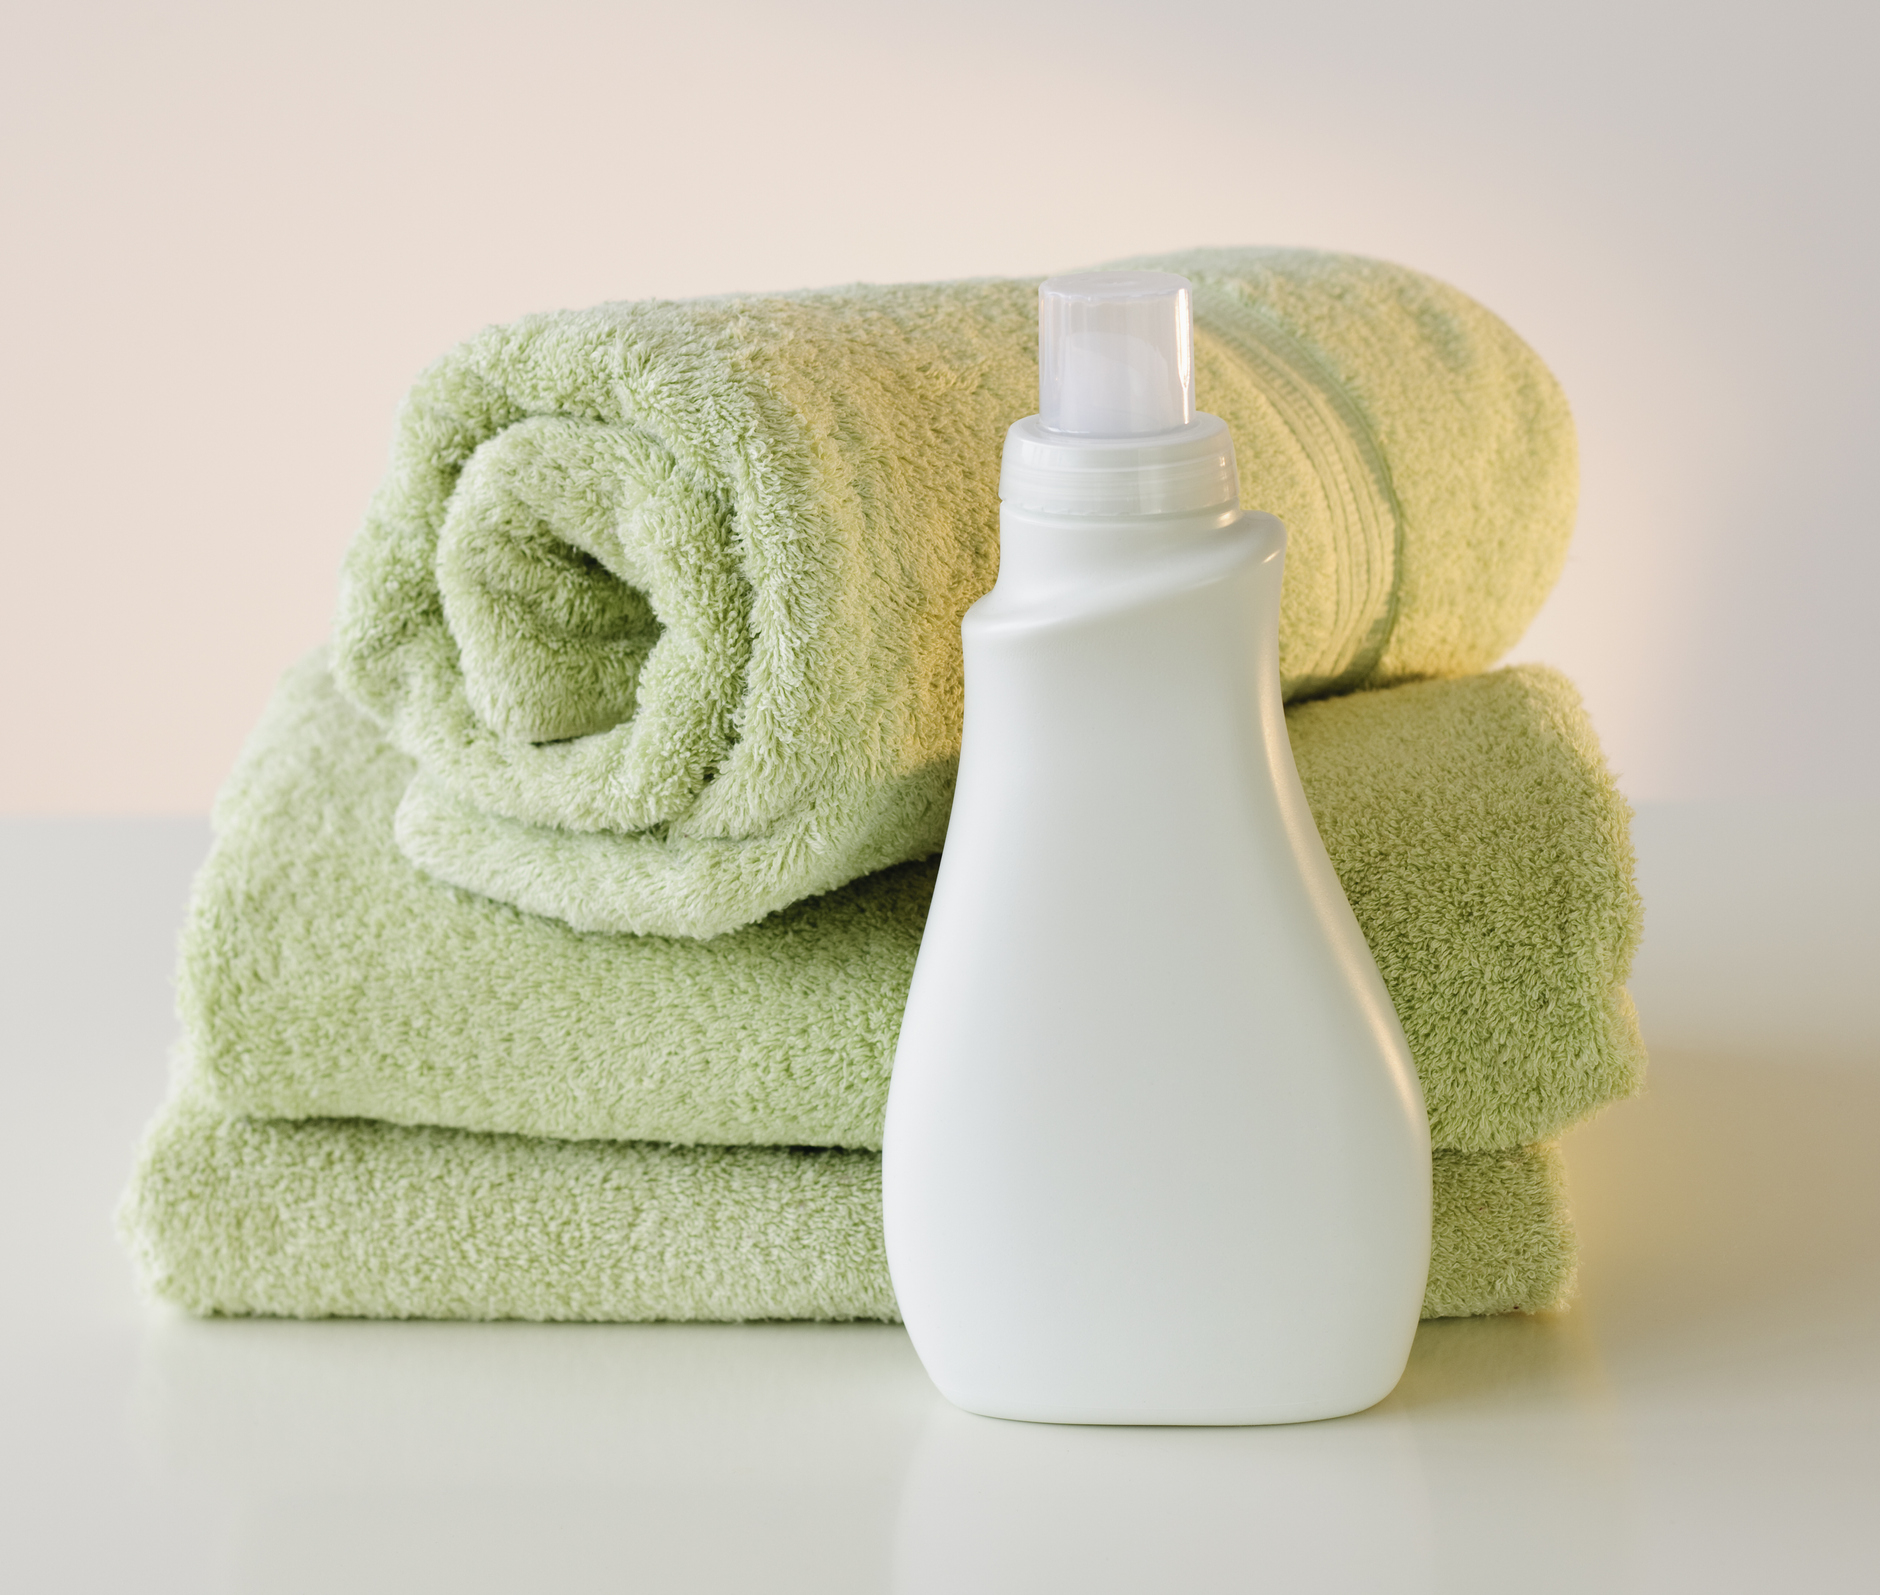 A bottle of laundry detergent next to some towels